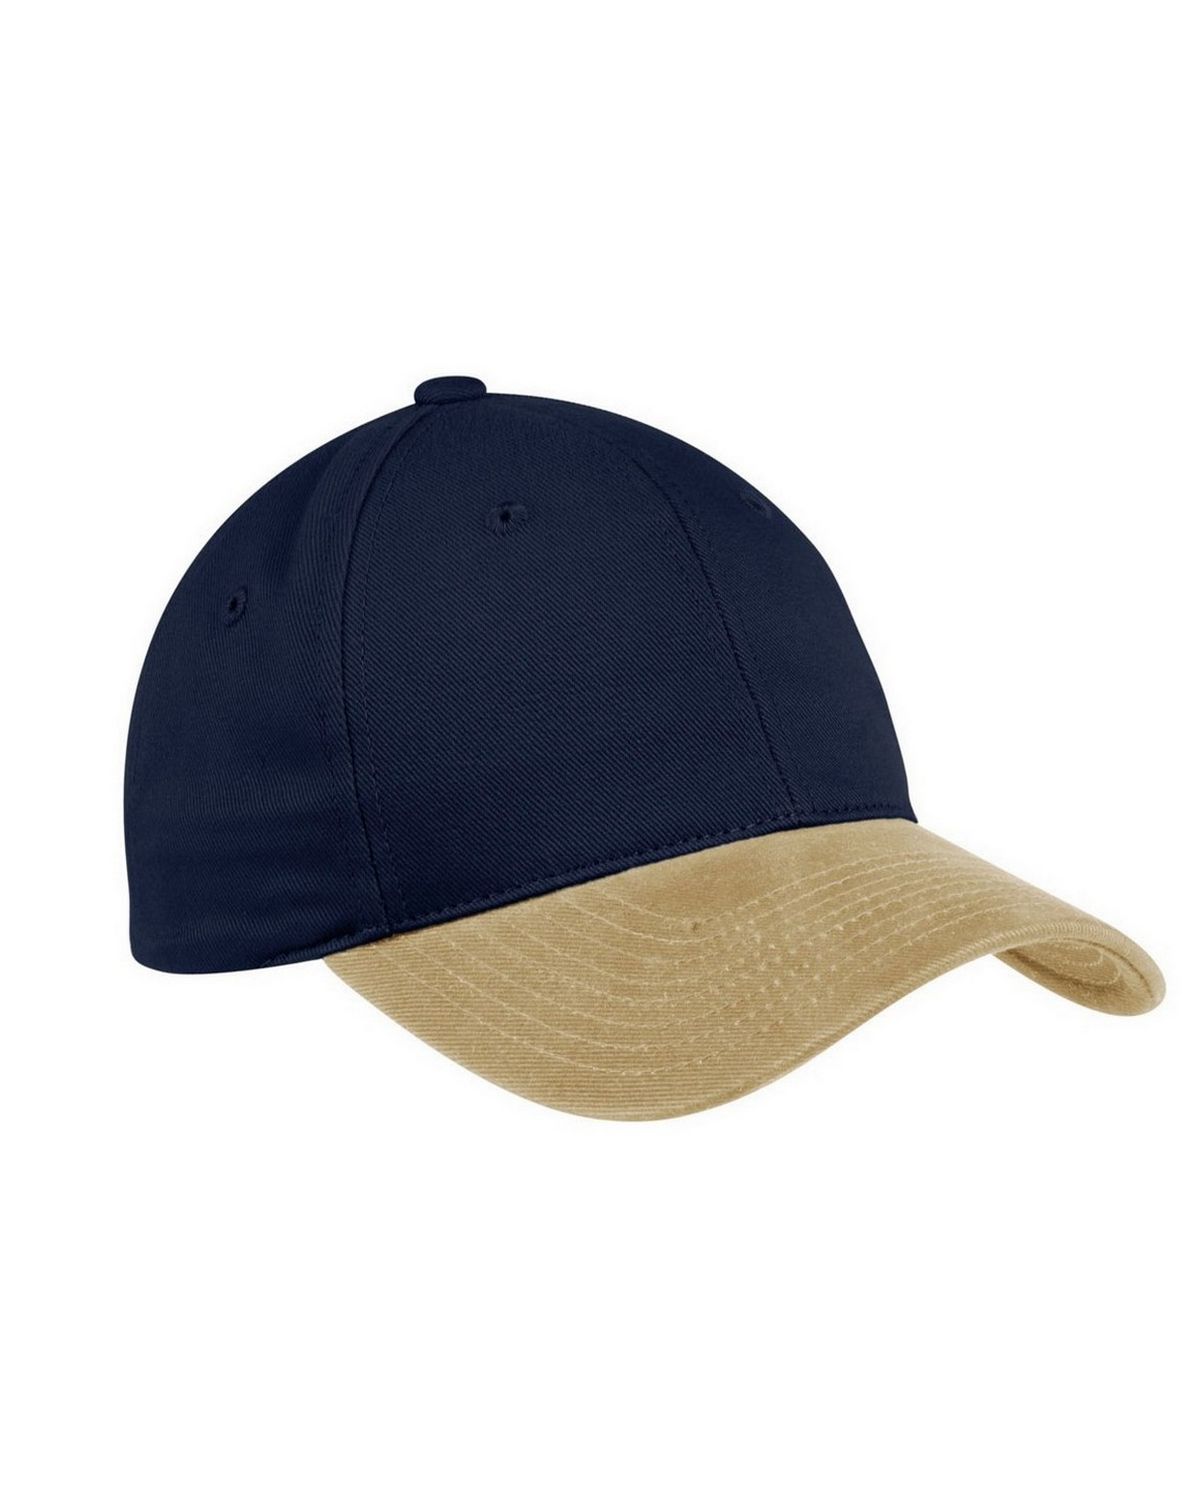 Port Authority C815 Men Two-Tone Brushed Twill Cap at Apparelstation